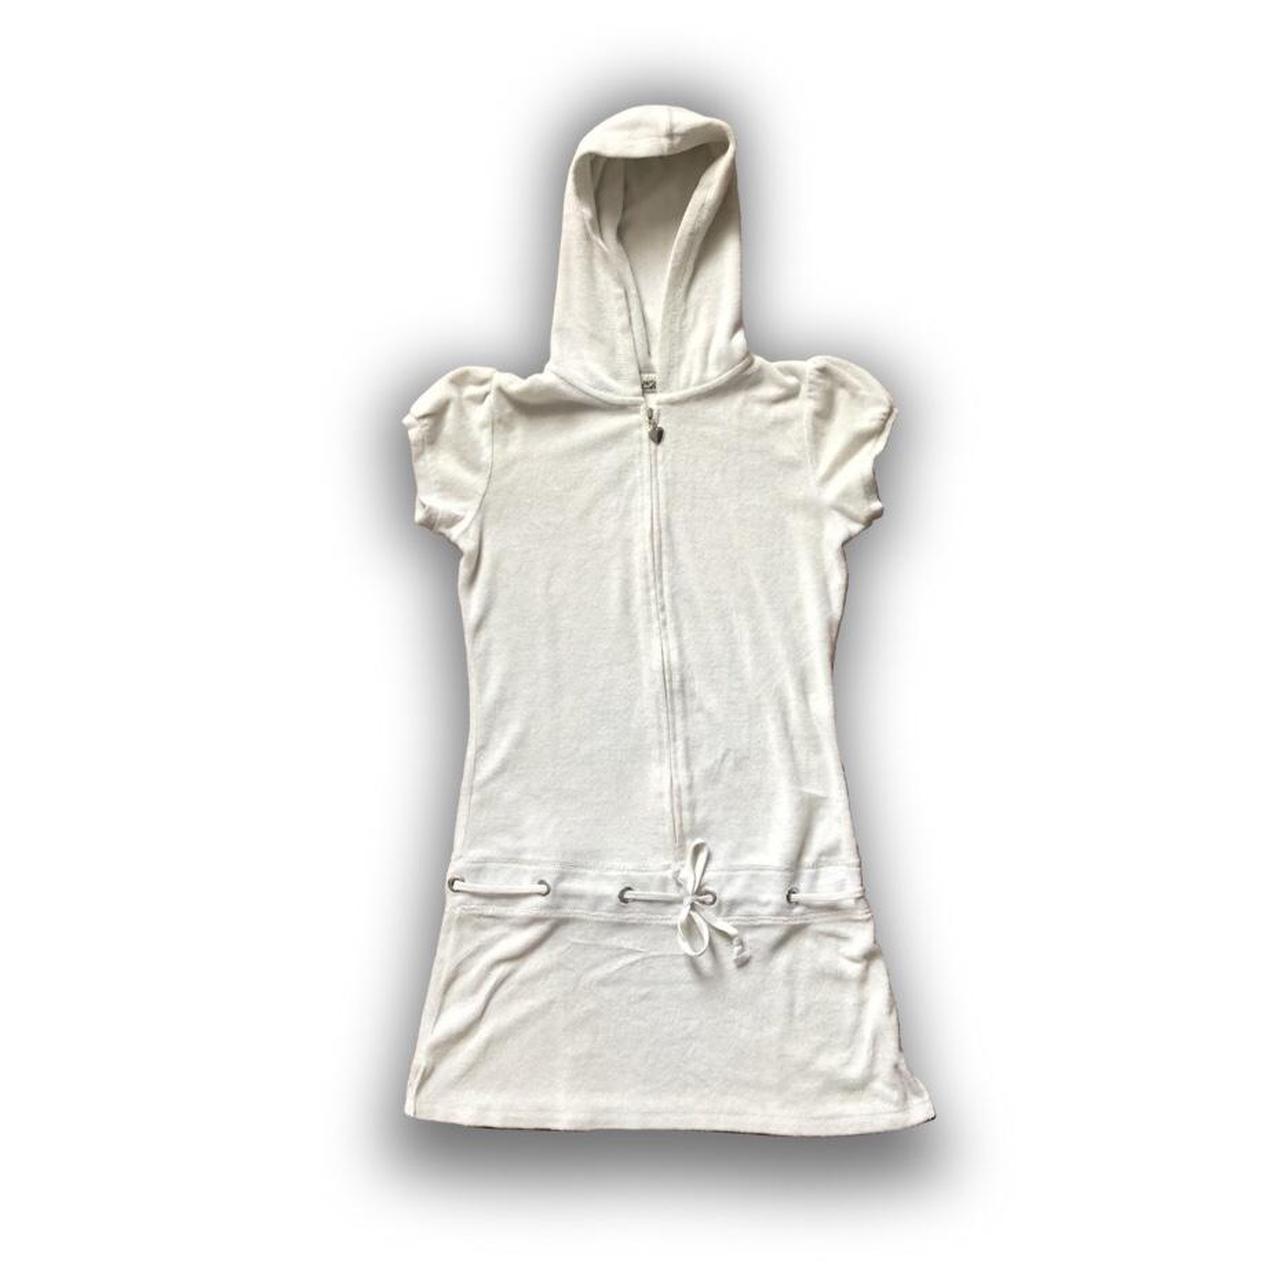 Juicy Couture Women's White Dress